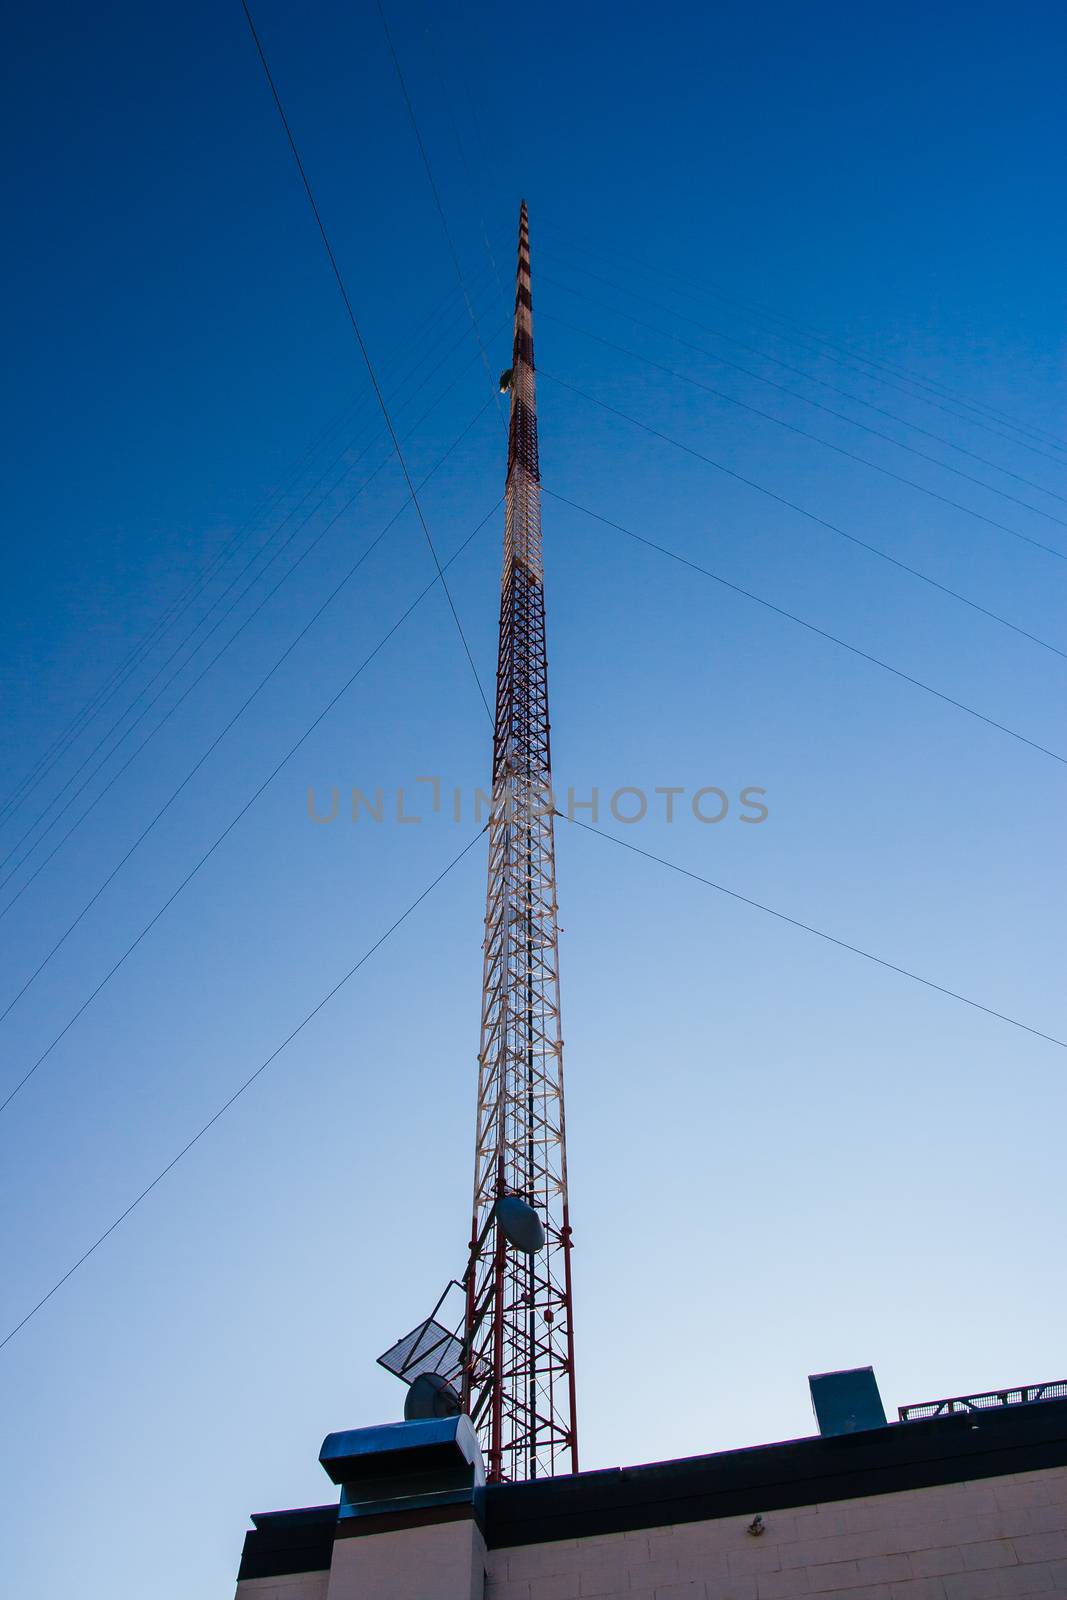 KVLY-TV TV Mast Antenna in USA by FiledIMAGE